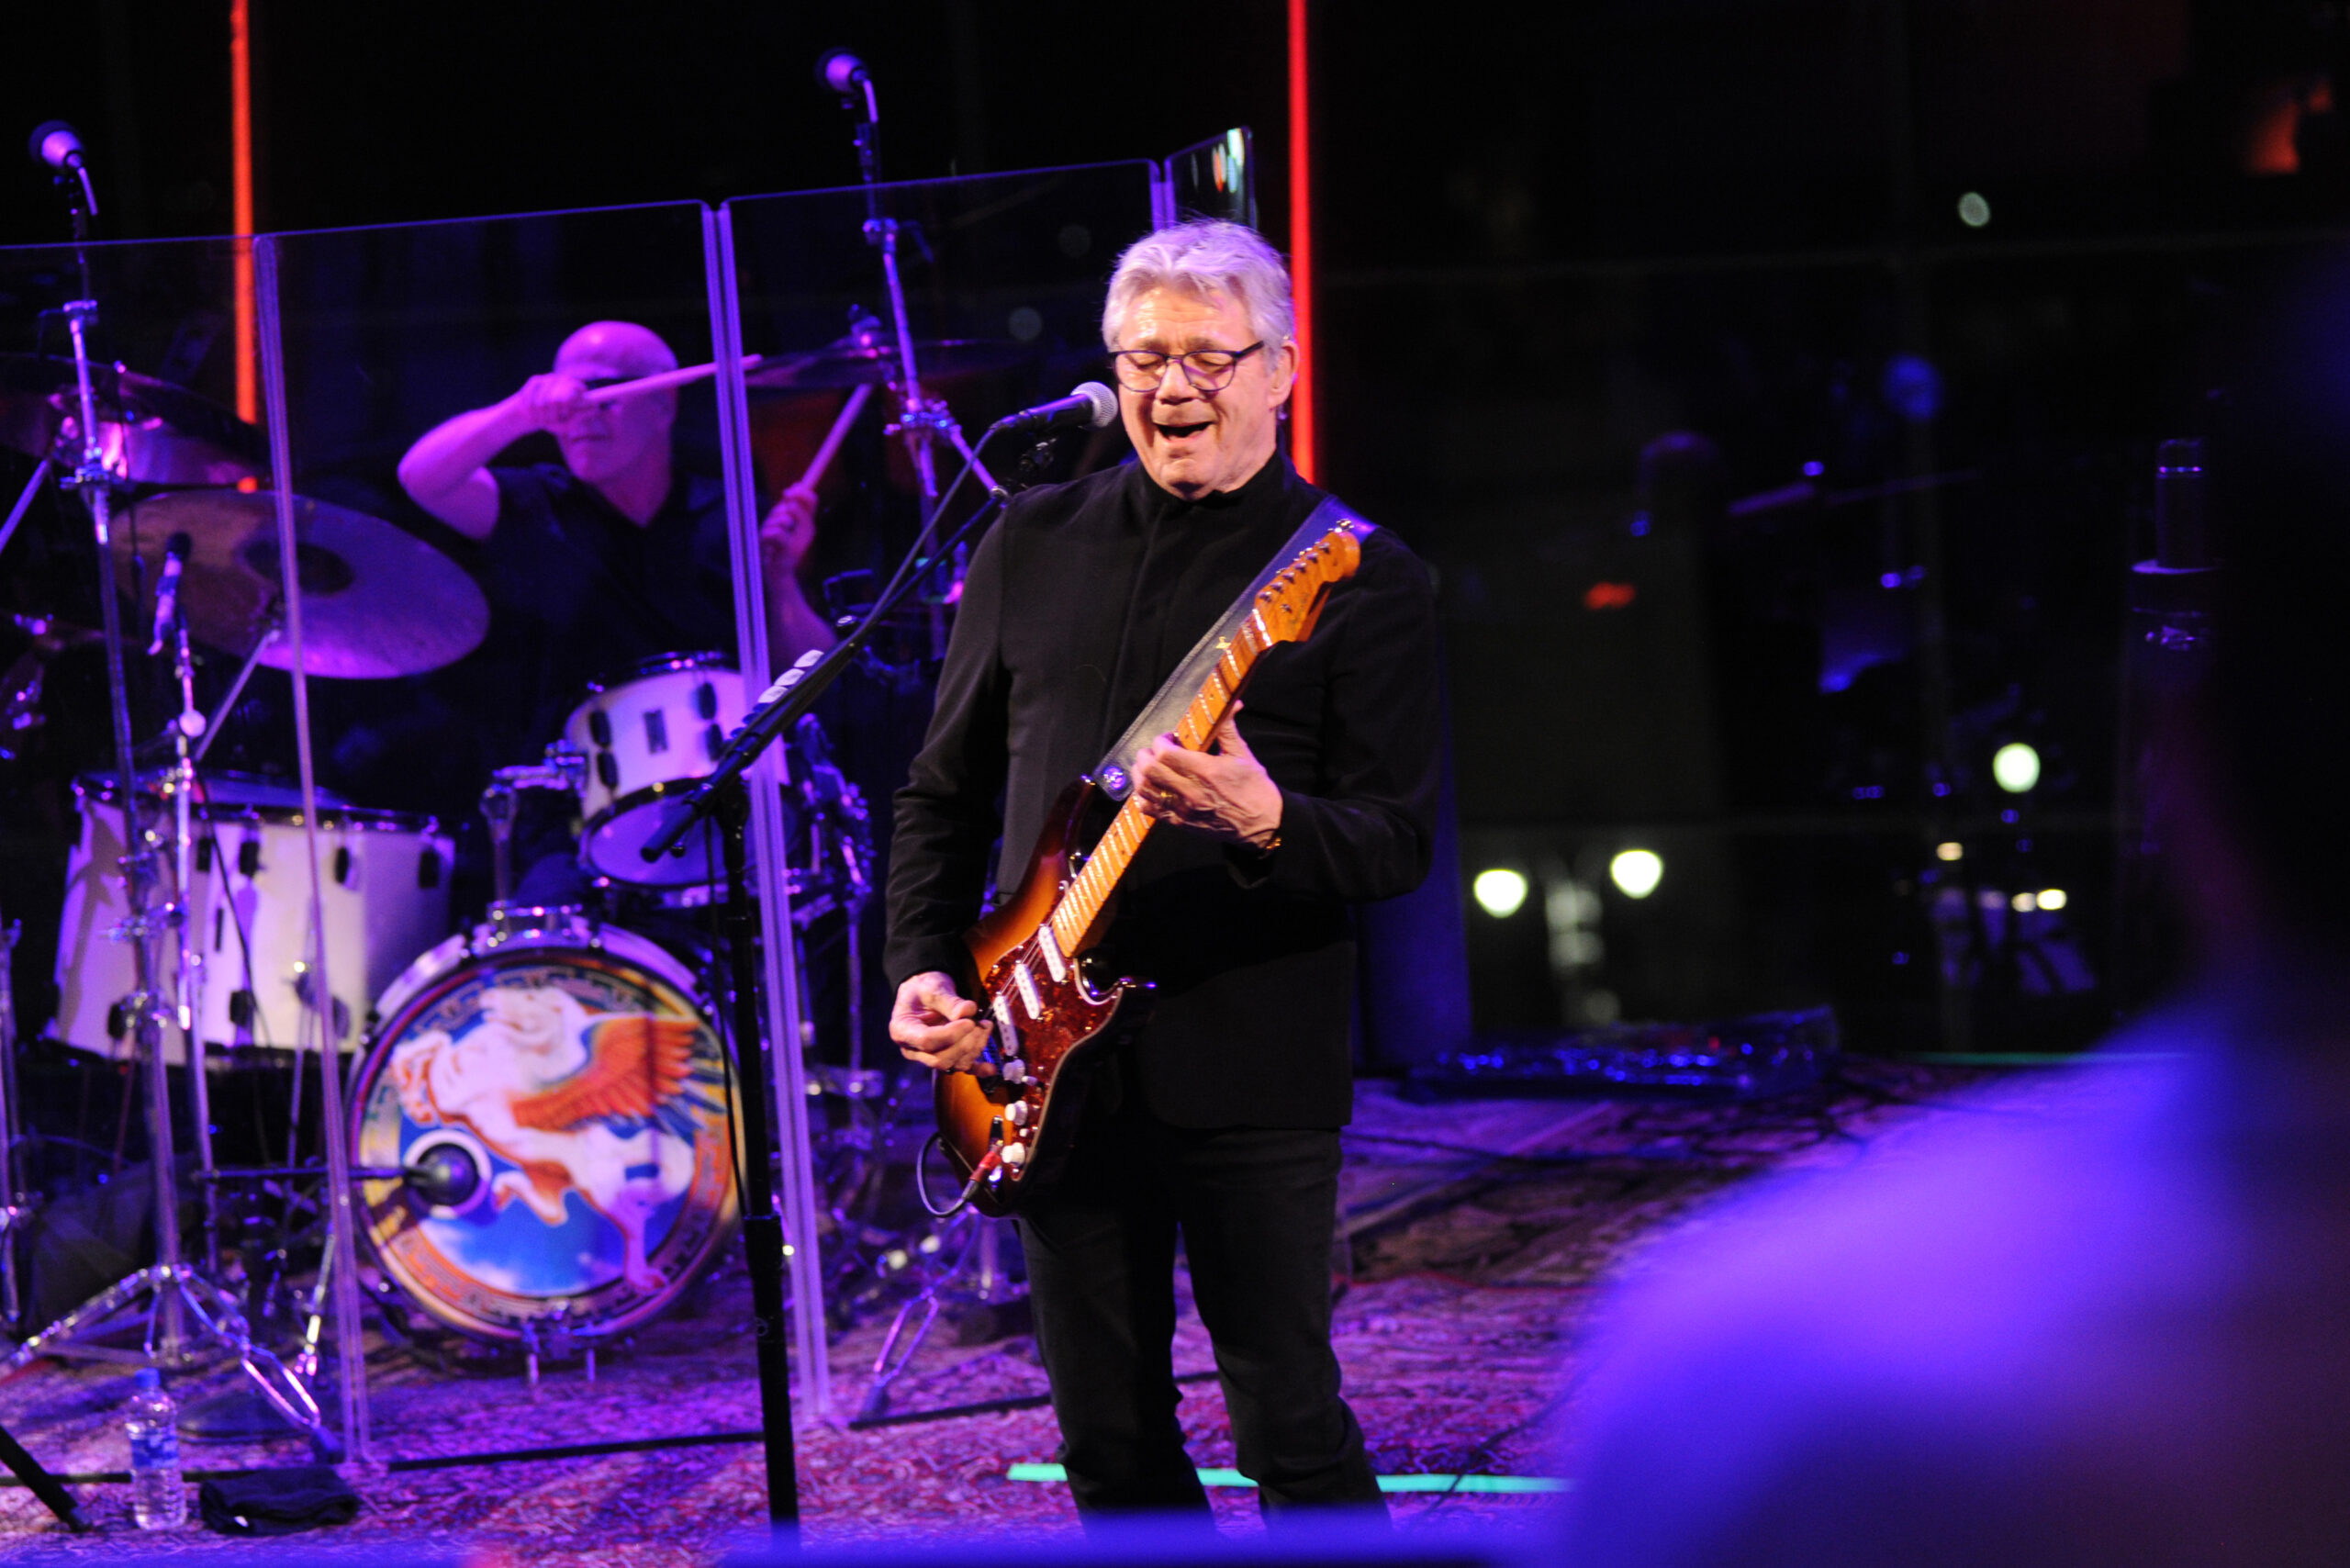 Steve Miller stands in front of the mic playing guitar